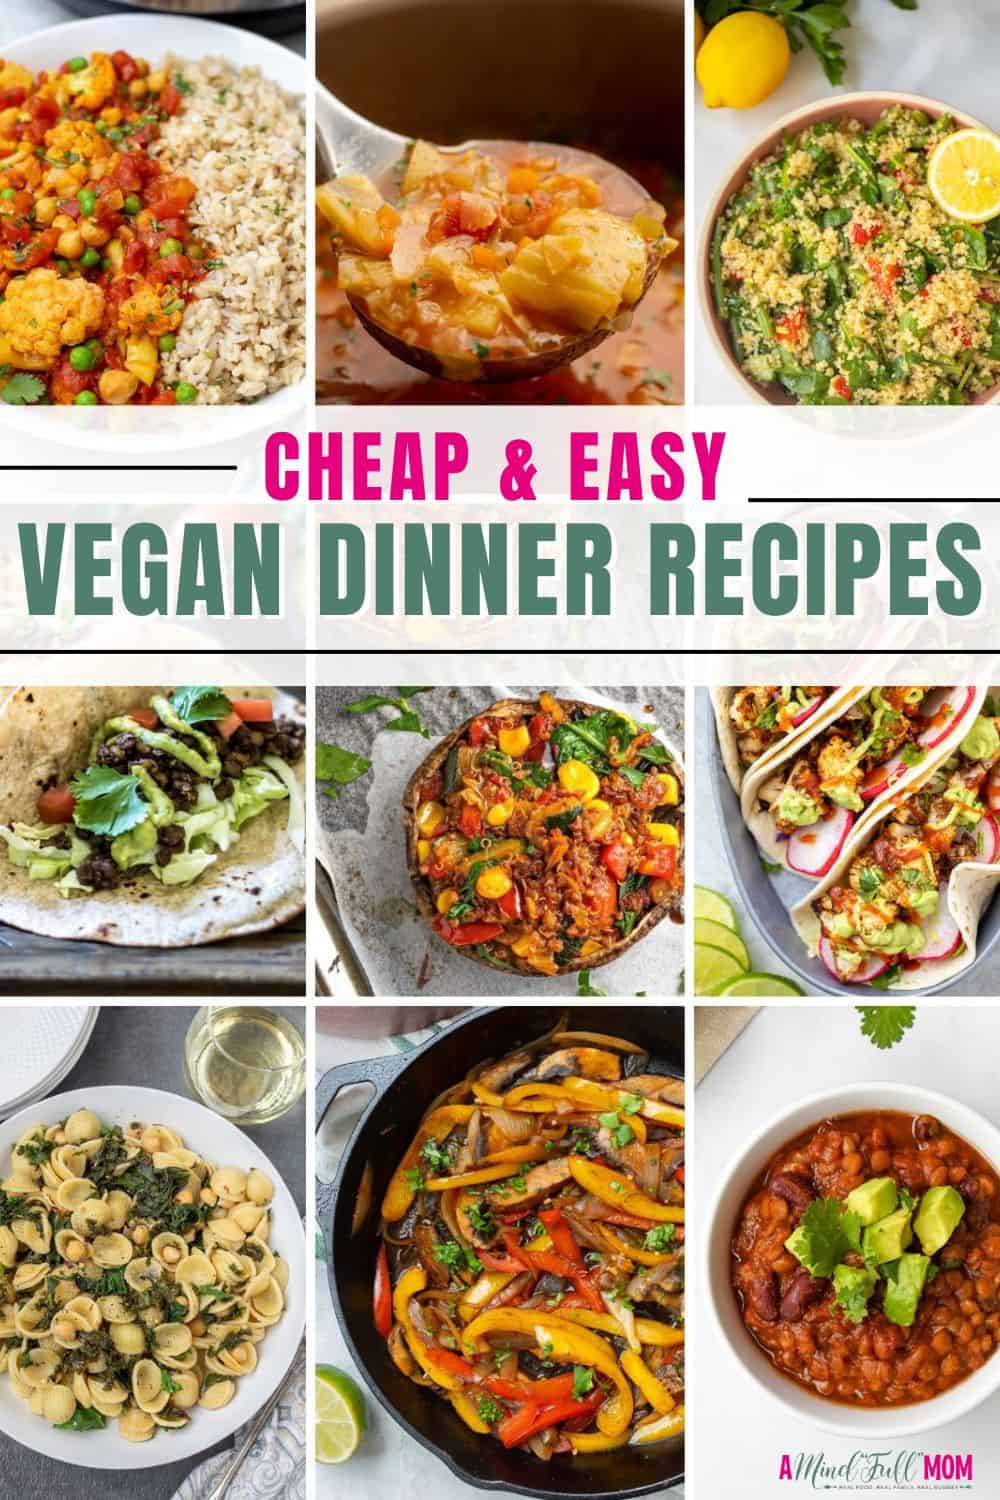 Whether you are trying to incorporate more whole foods into your diet, cut back your expenses, or add more vegan dinners to your rotation, I have created the Ultimate list of Cheap & Easy Family-Friendly Vegan Dinner Recipes to add to your meal plan!